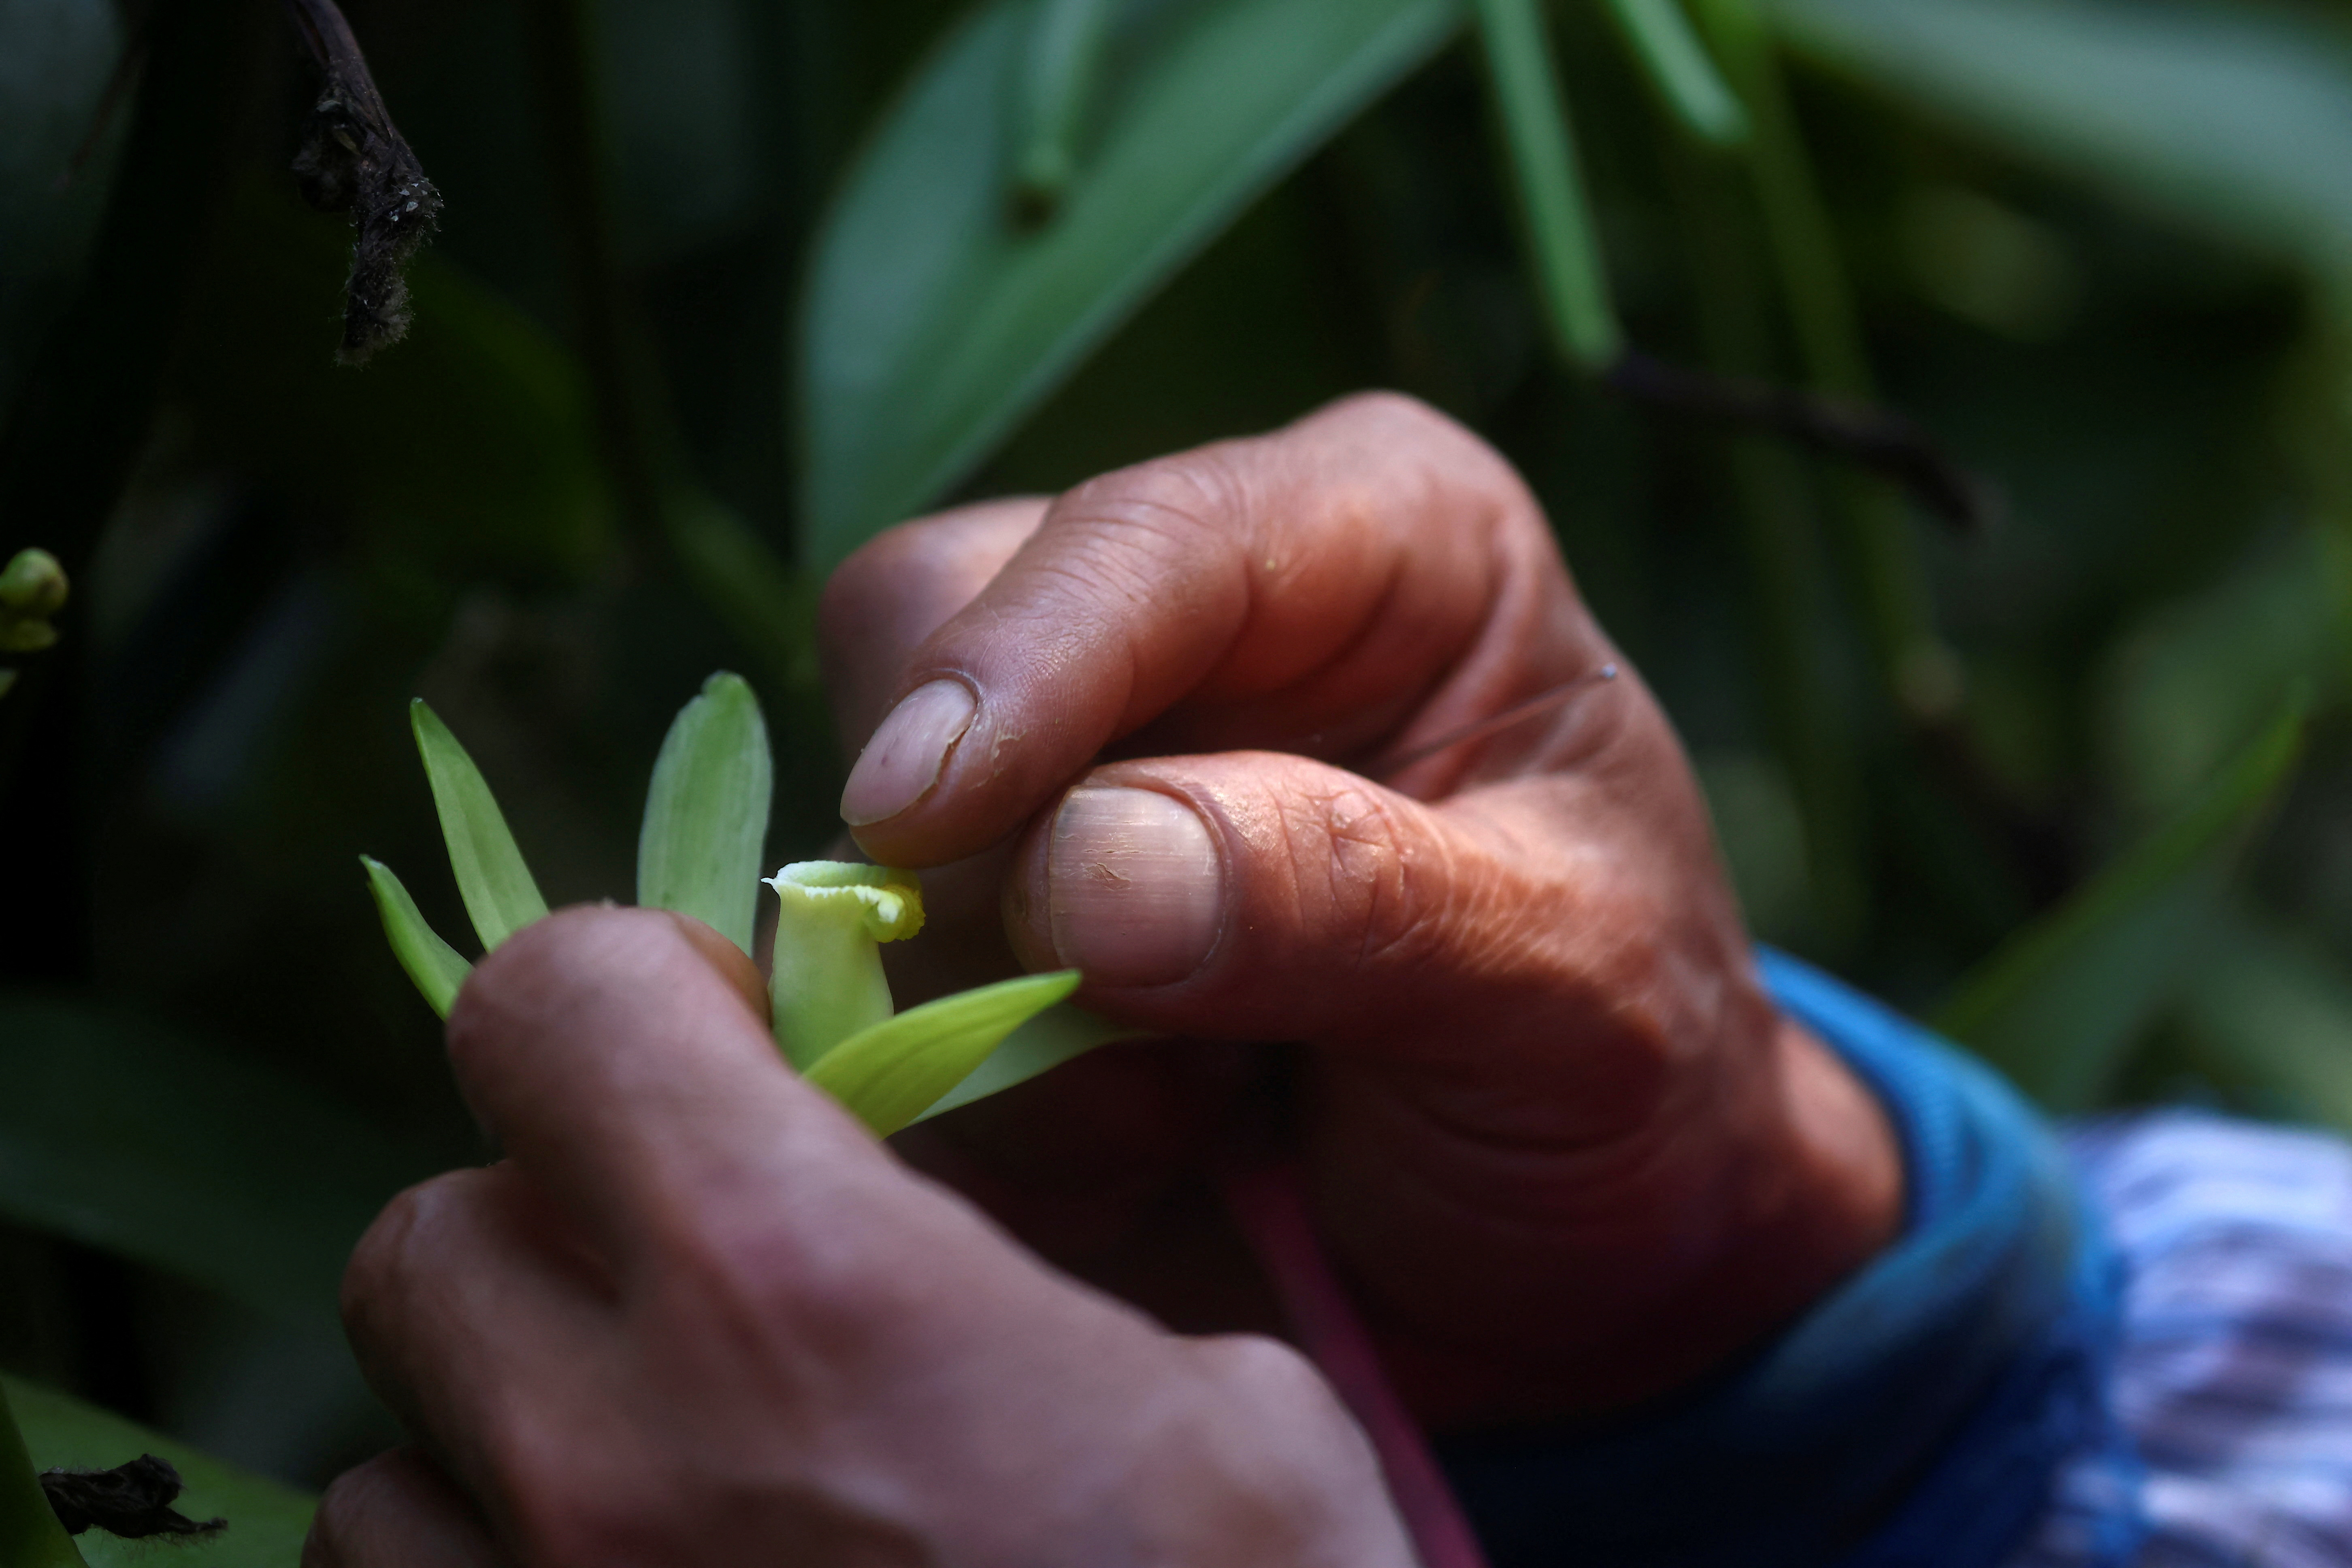 Taiwan's vanilla farmer Tseng Tien-fu works on a renewable development plan to resolve the country's energy needs